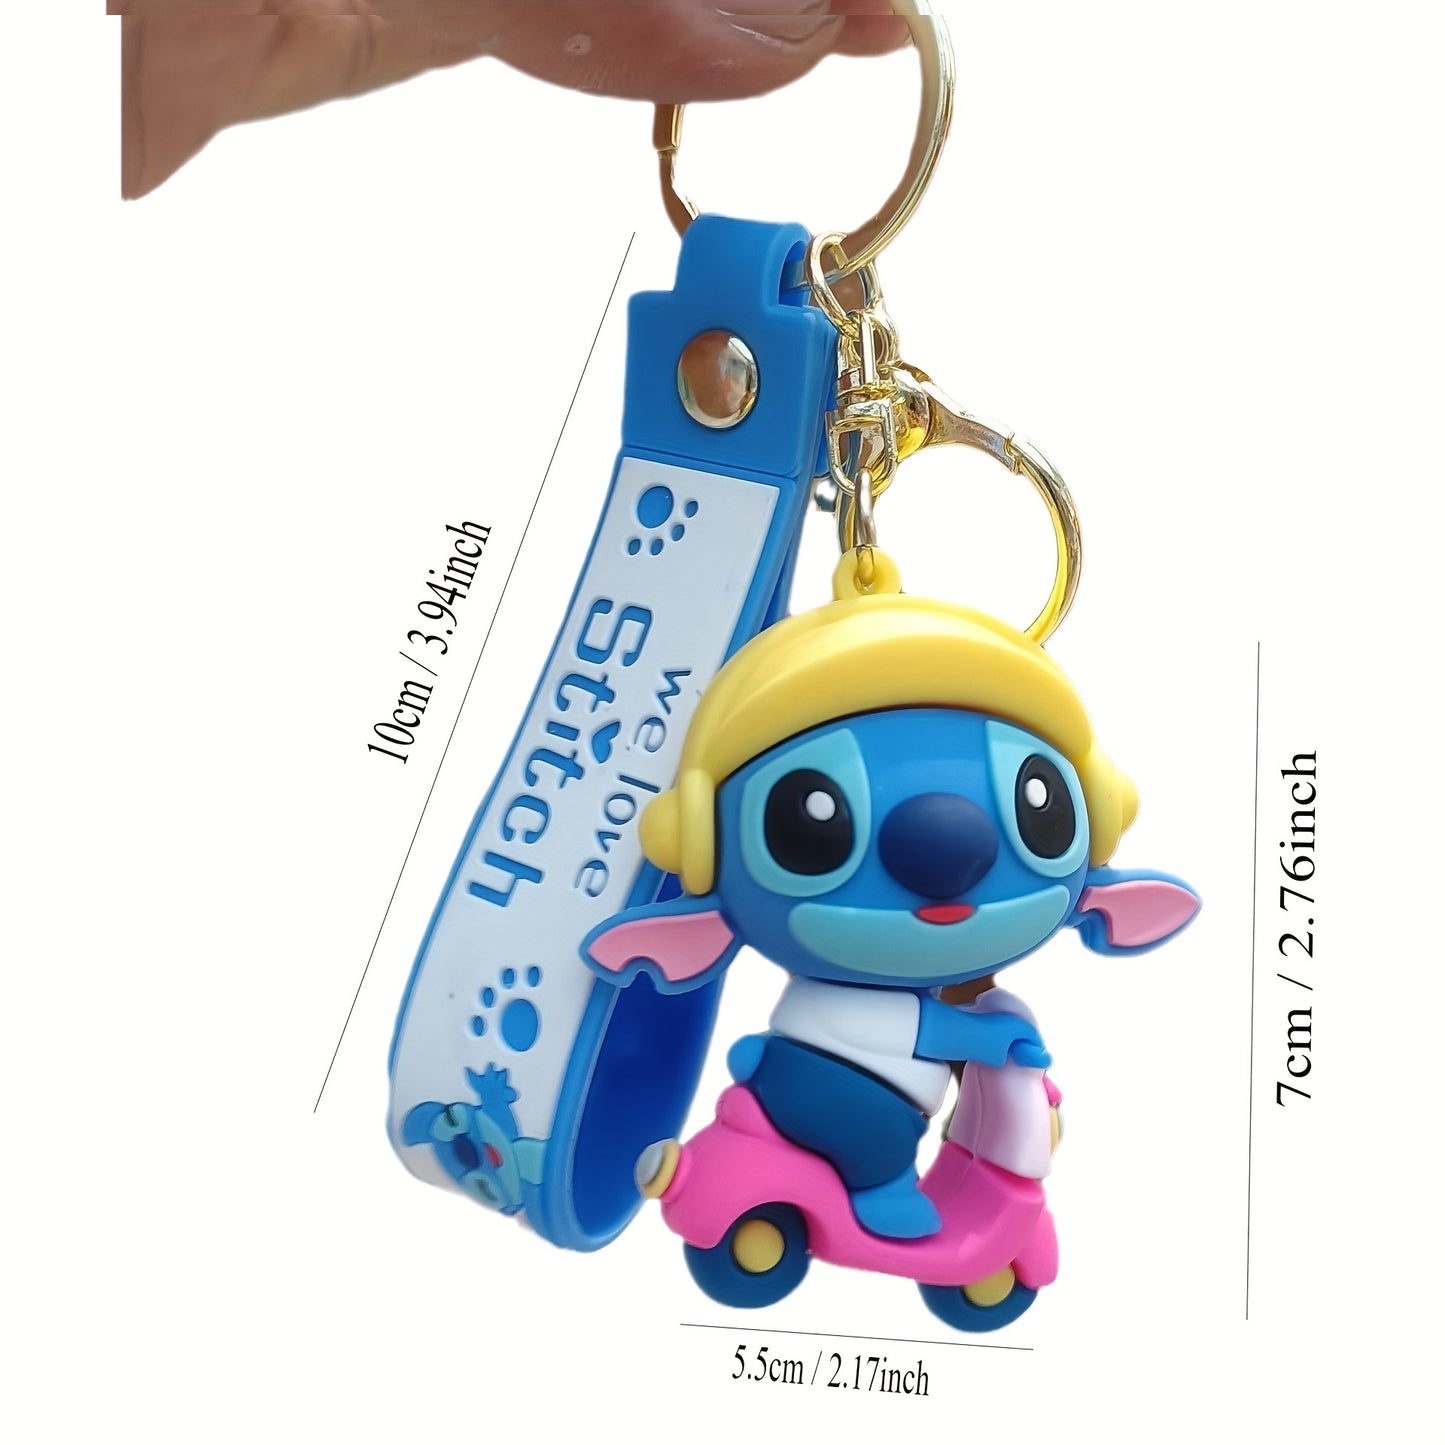 Adorable Disney Lilo & Stitch Kawaii Keychain - Charming 3D Anime Pendant Charm - Durable Keyring for Unforgettable Birthday & Christmas Gifts - Rexpect Nerd